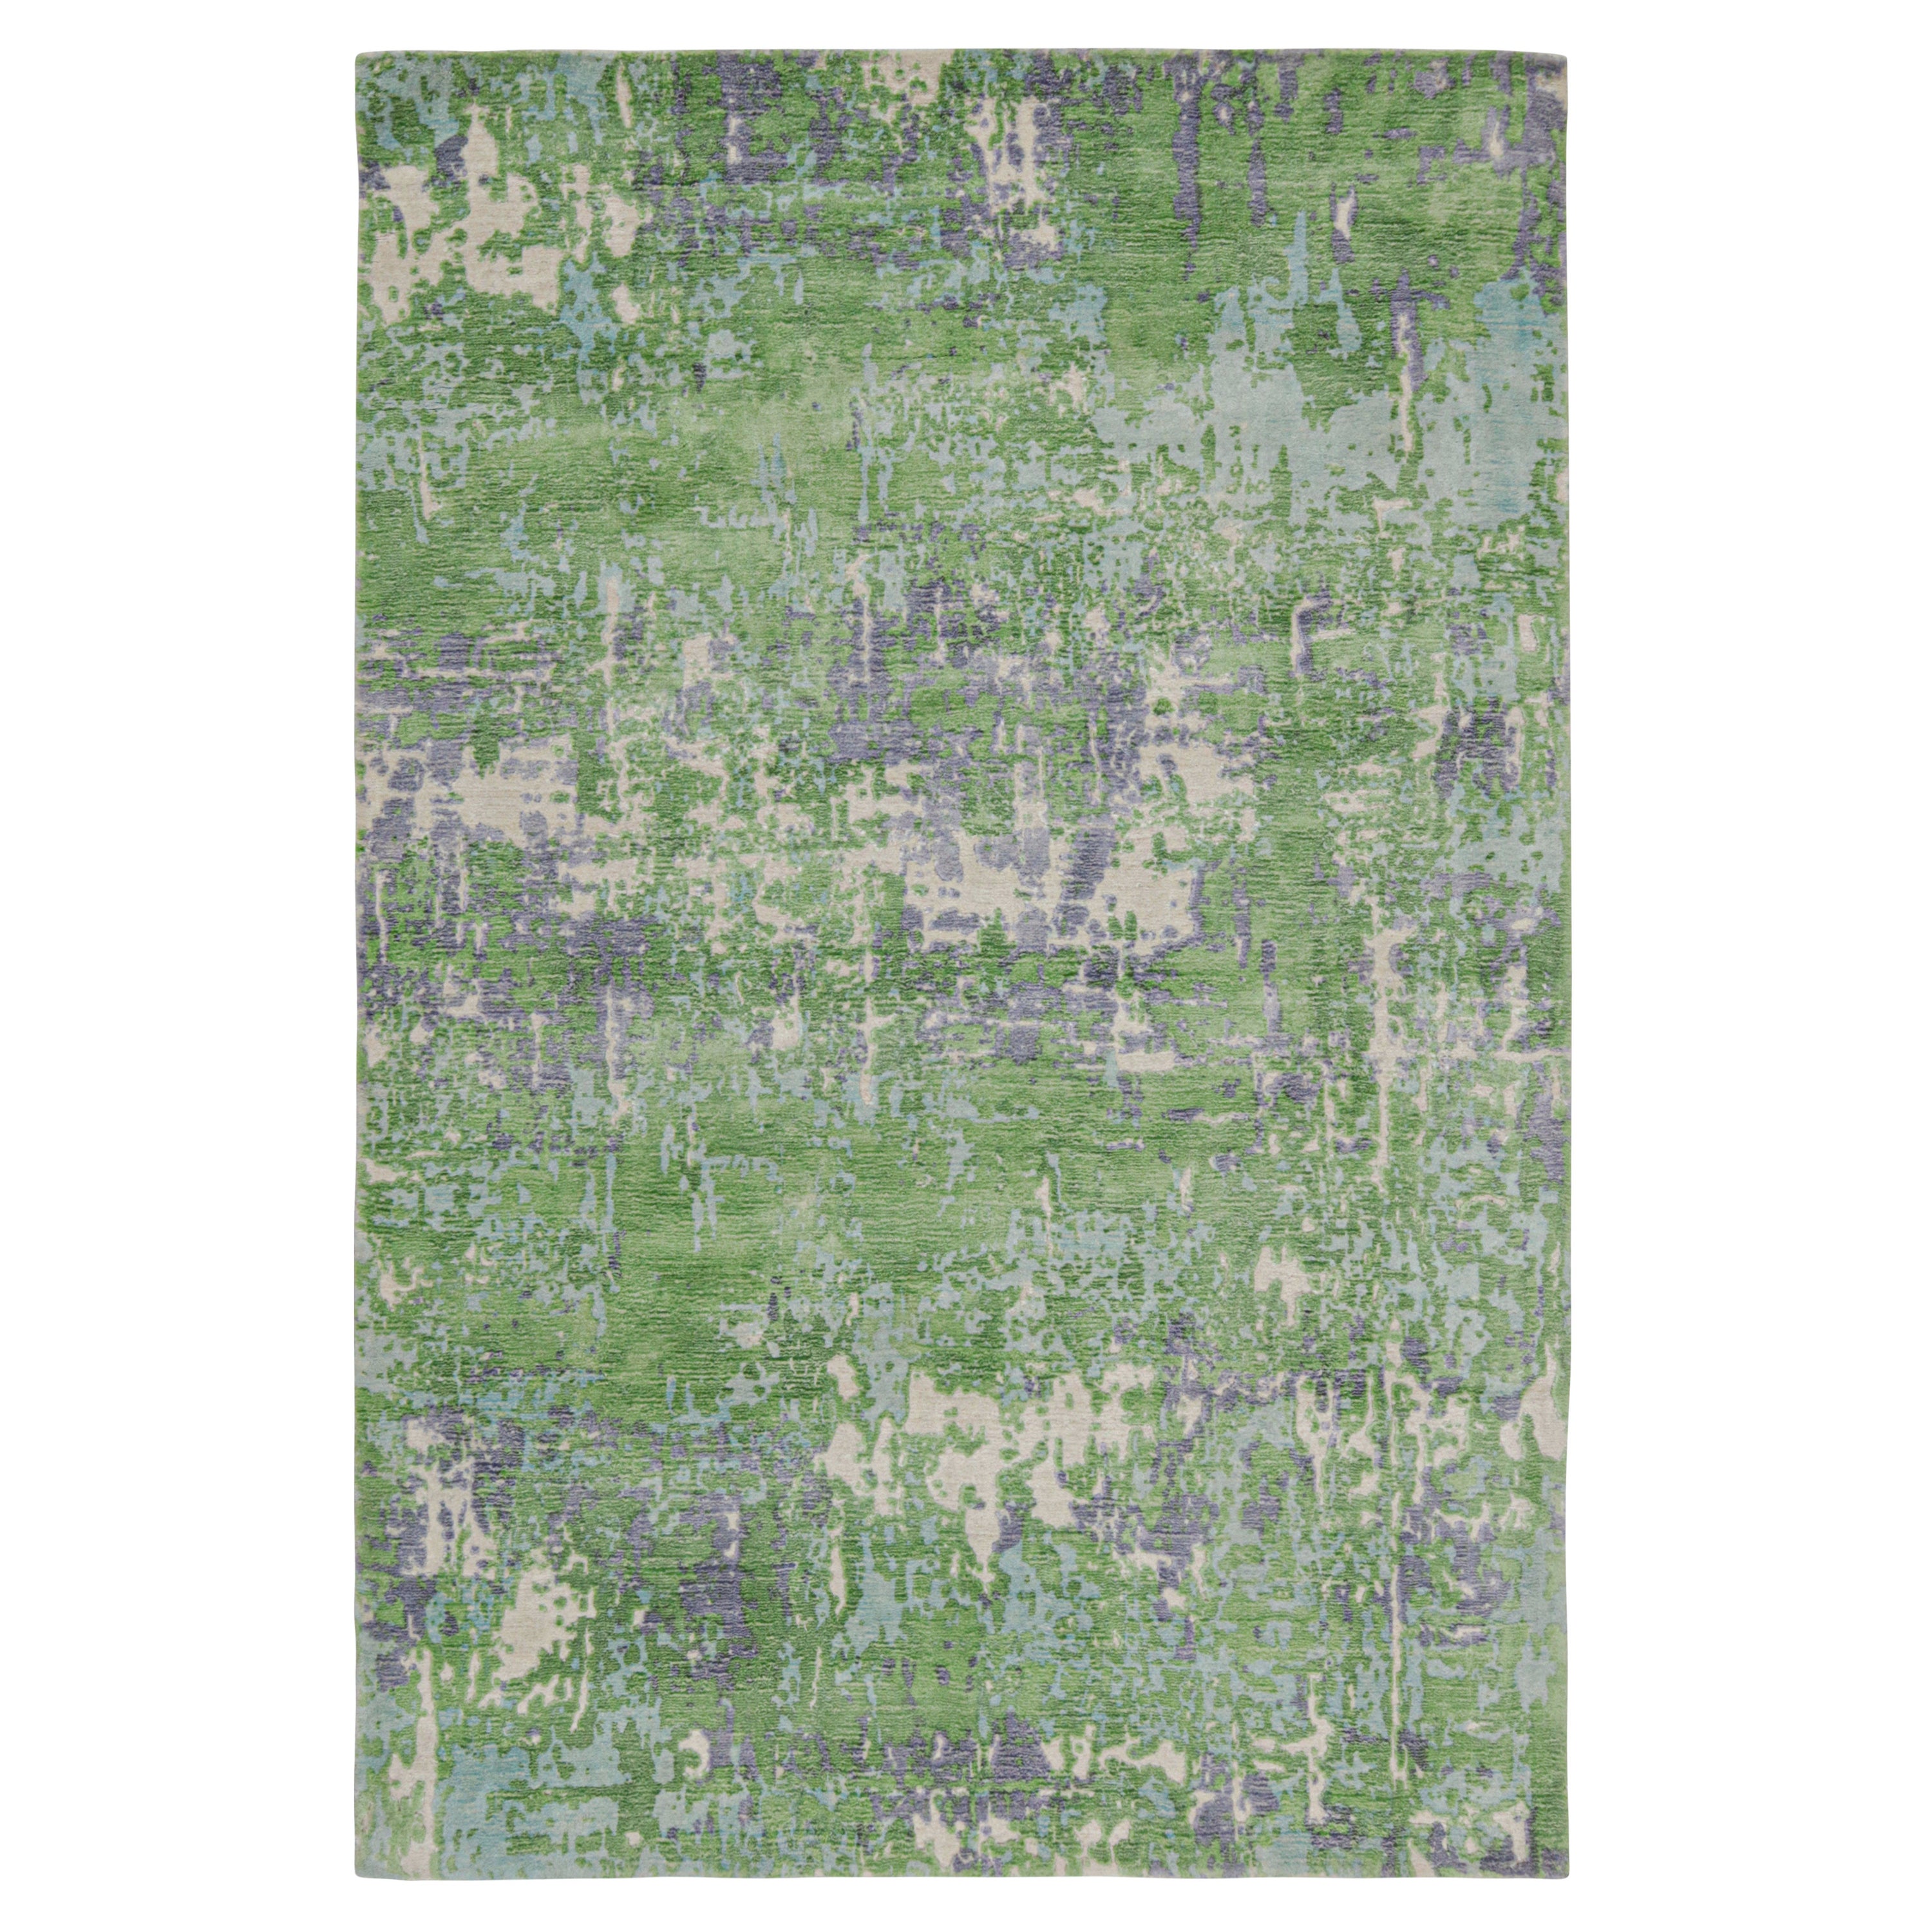 Rug & Kilim’s Abstract Rug in Green, Blue and Beige All-Over Pattern